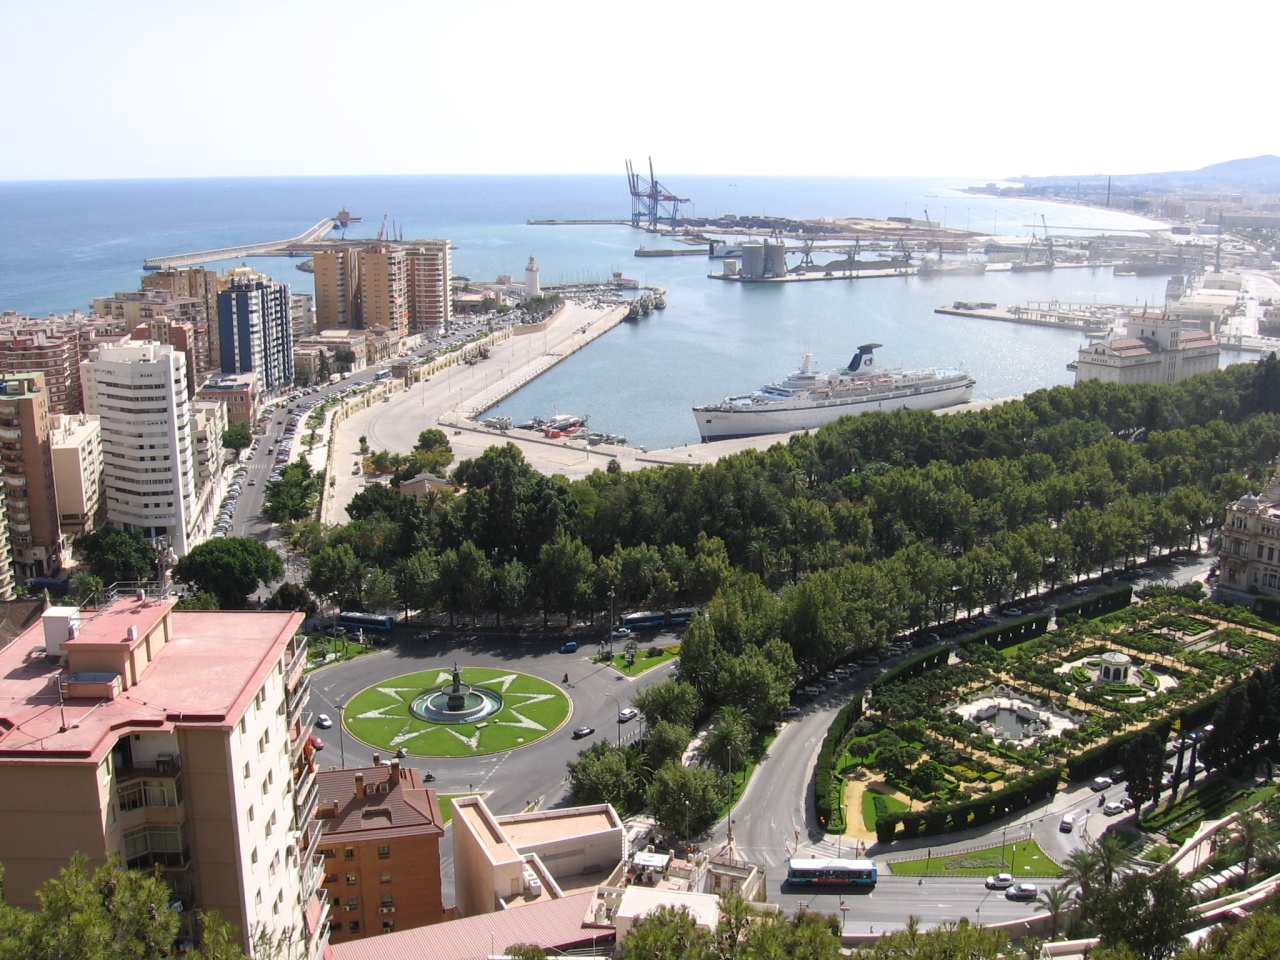 Luxury tourism grows by 30% in Spain’s Malaga
– News X